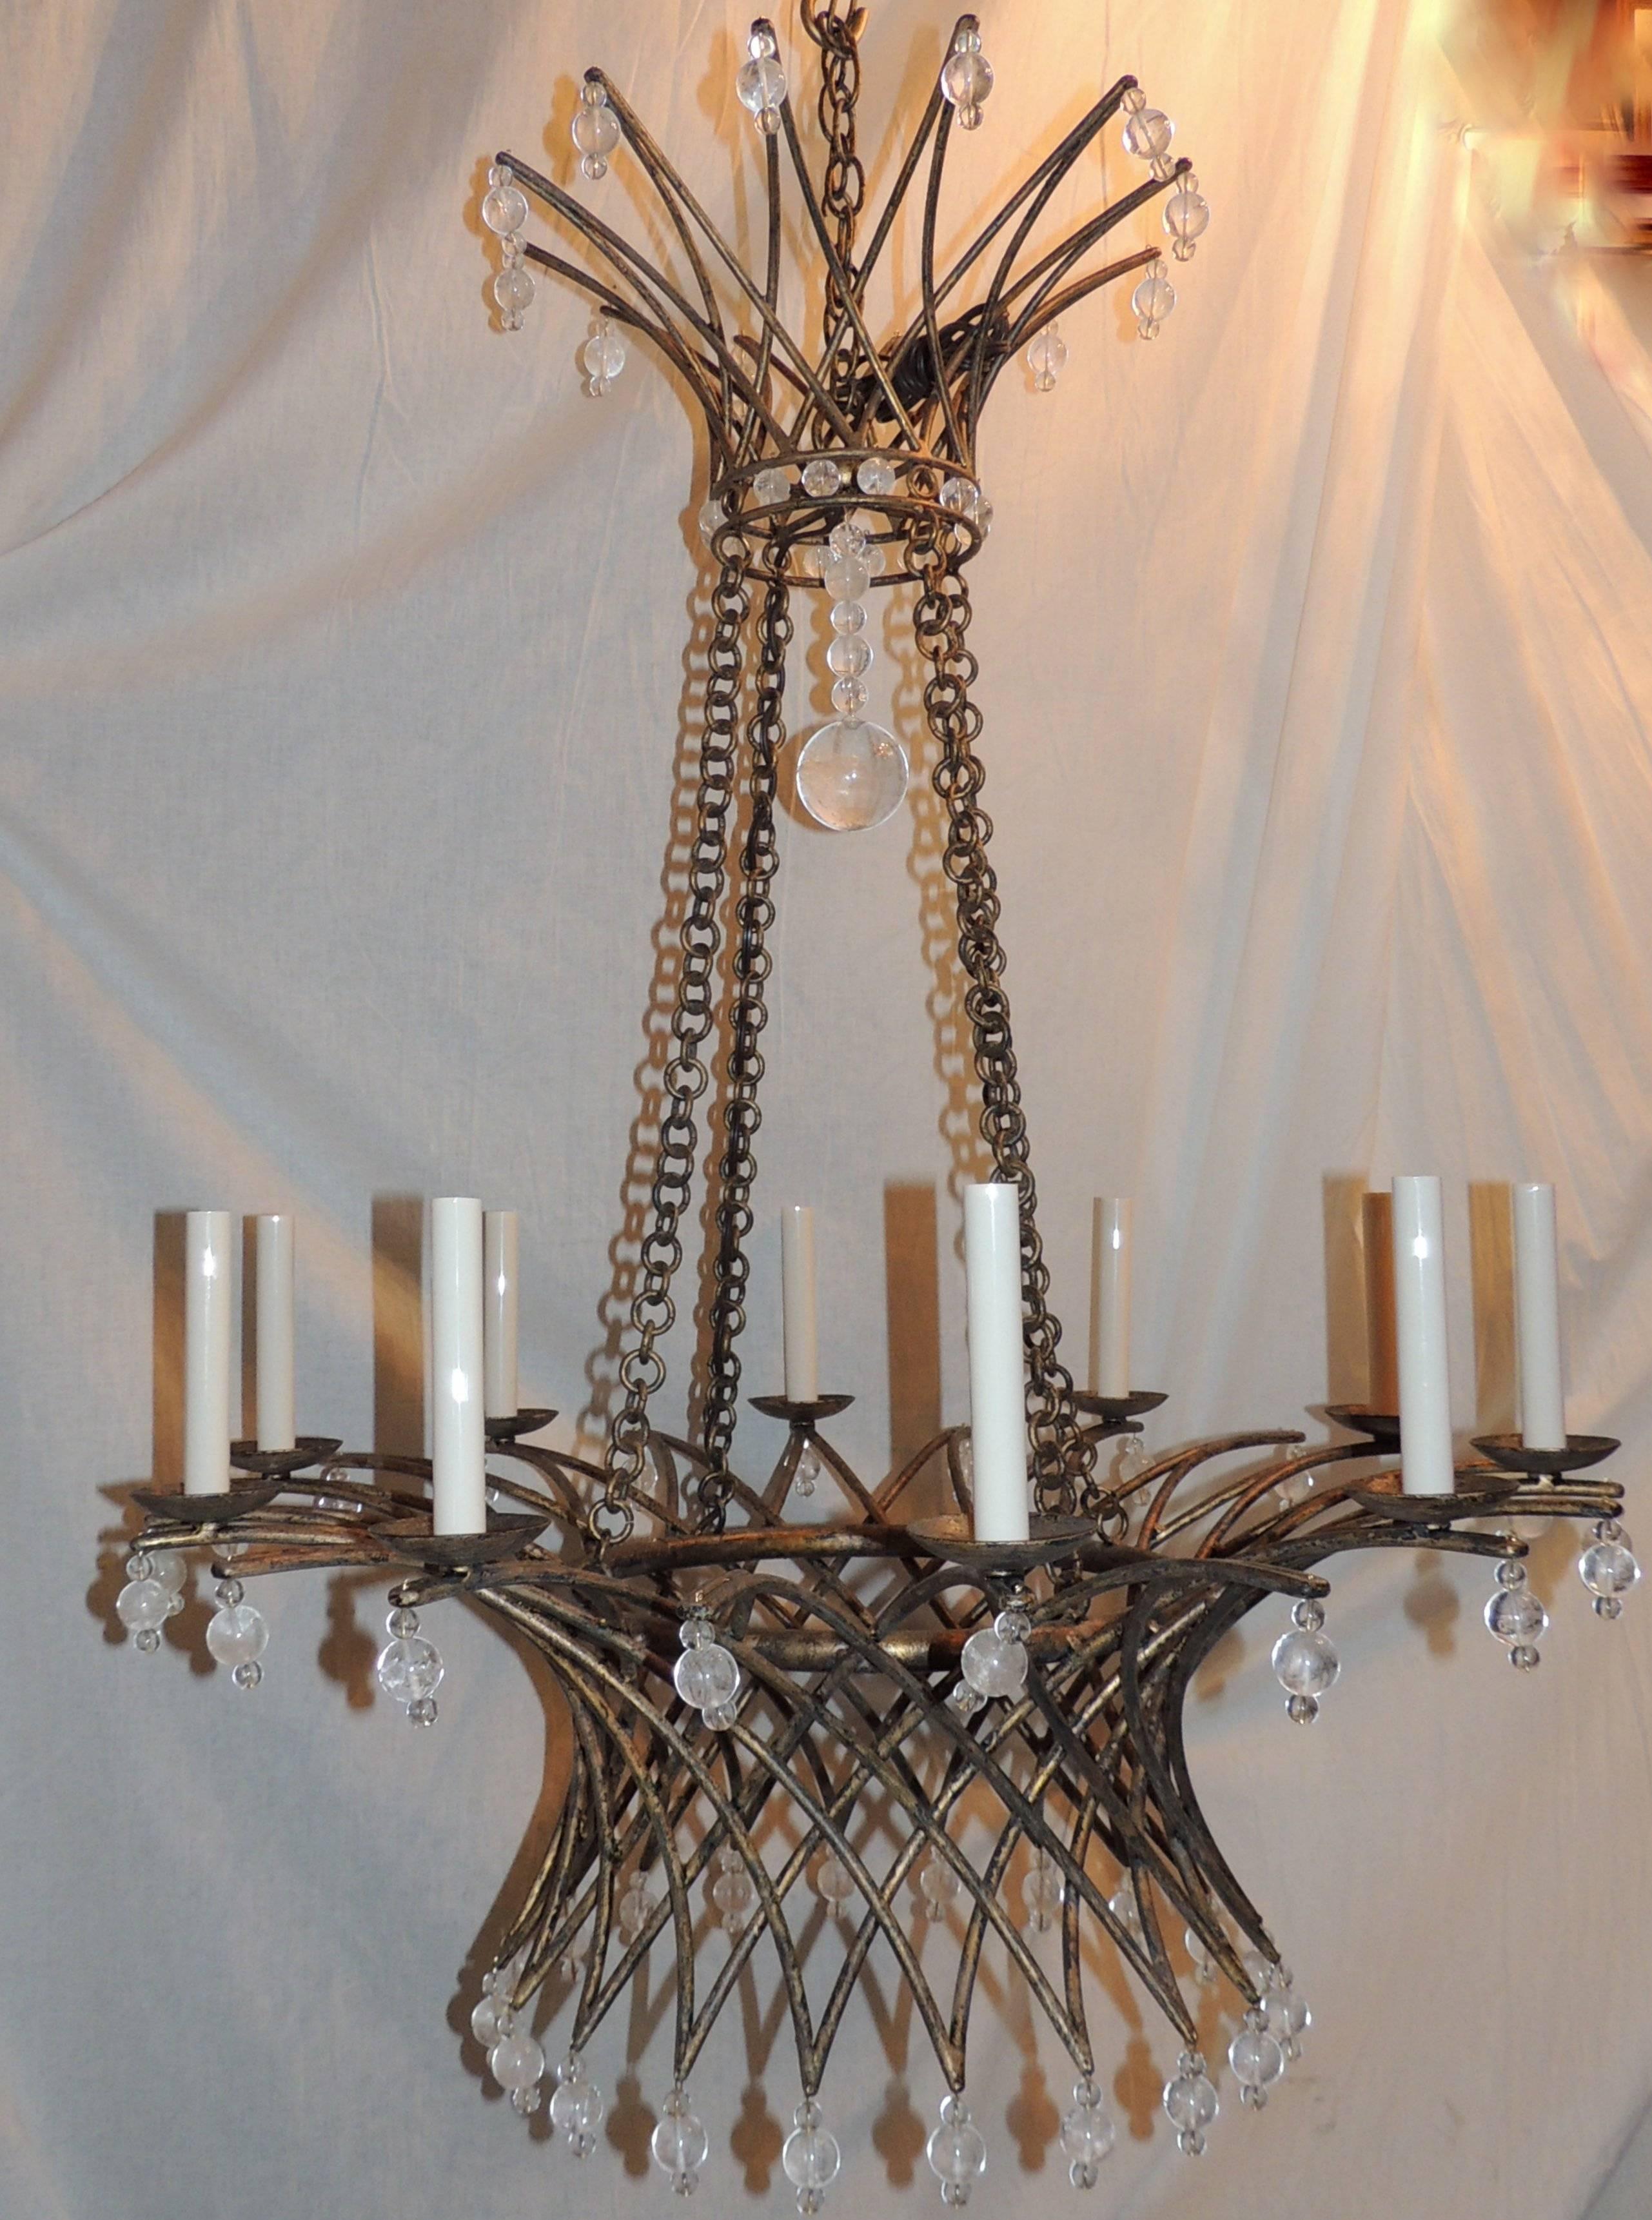 A large ten-light chandelier in a basket form, accented with crystal beads and rock crystal. The crown has crystal beads and a center rock crystal ball highlighting the center.

Measures: 42